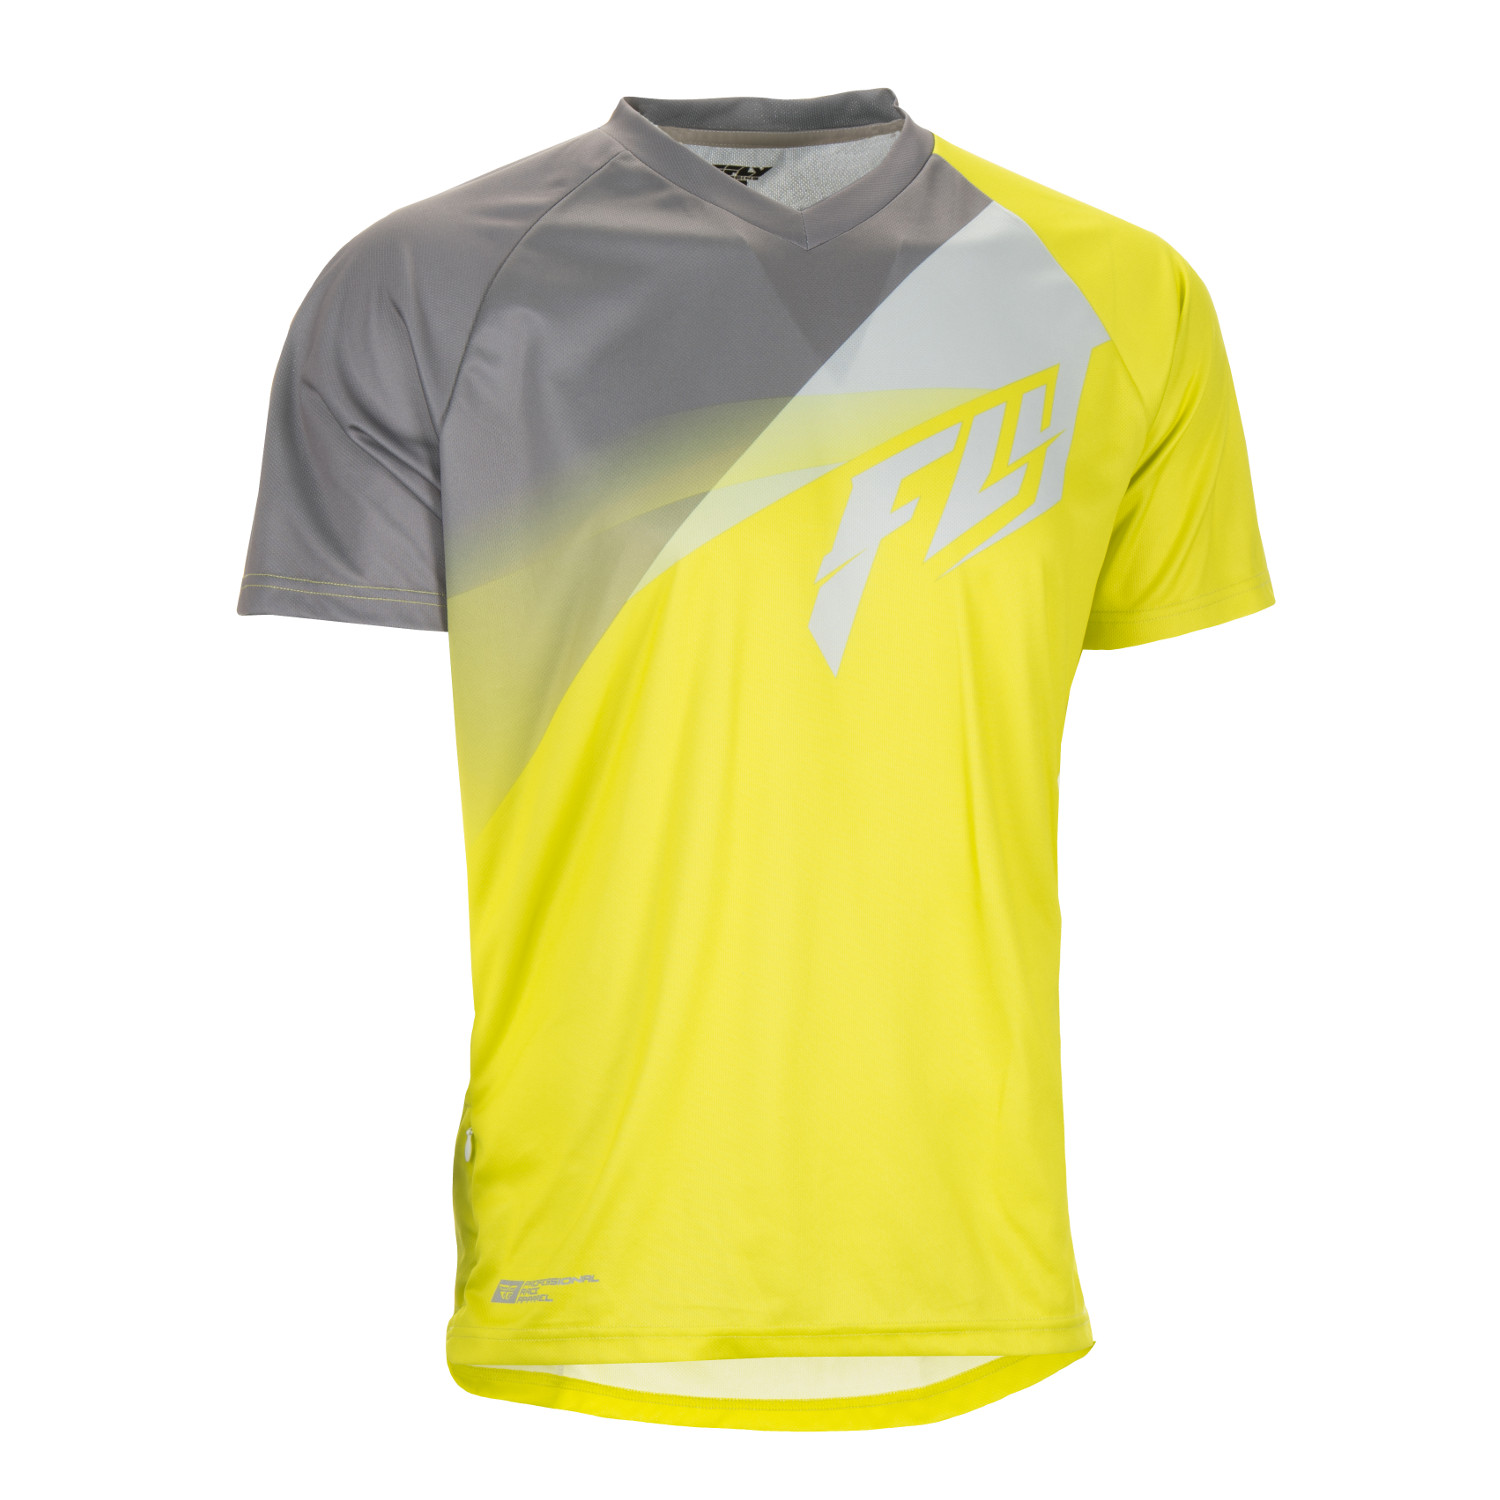 Fly Racing Maillot VTT Manches Courtes Super D Lime/Grey